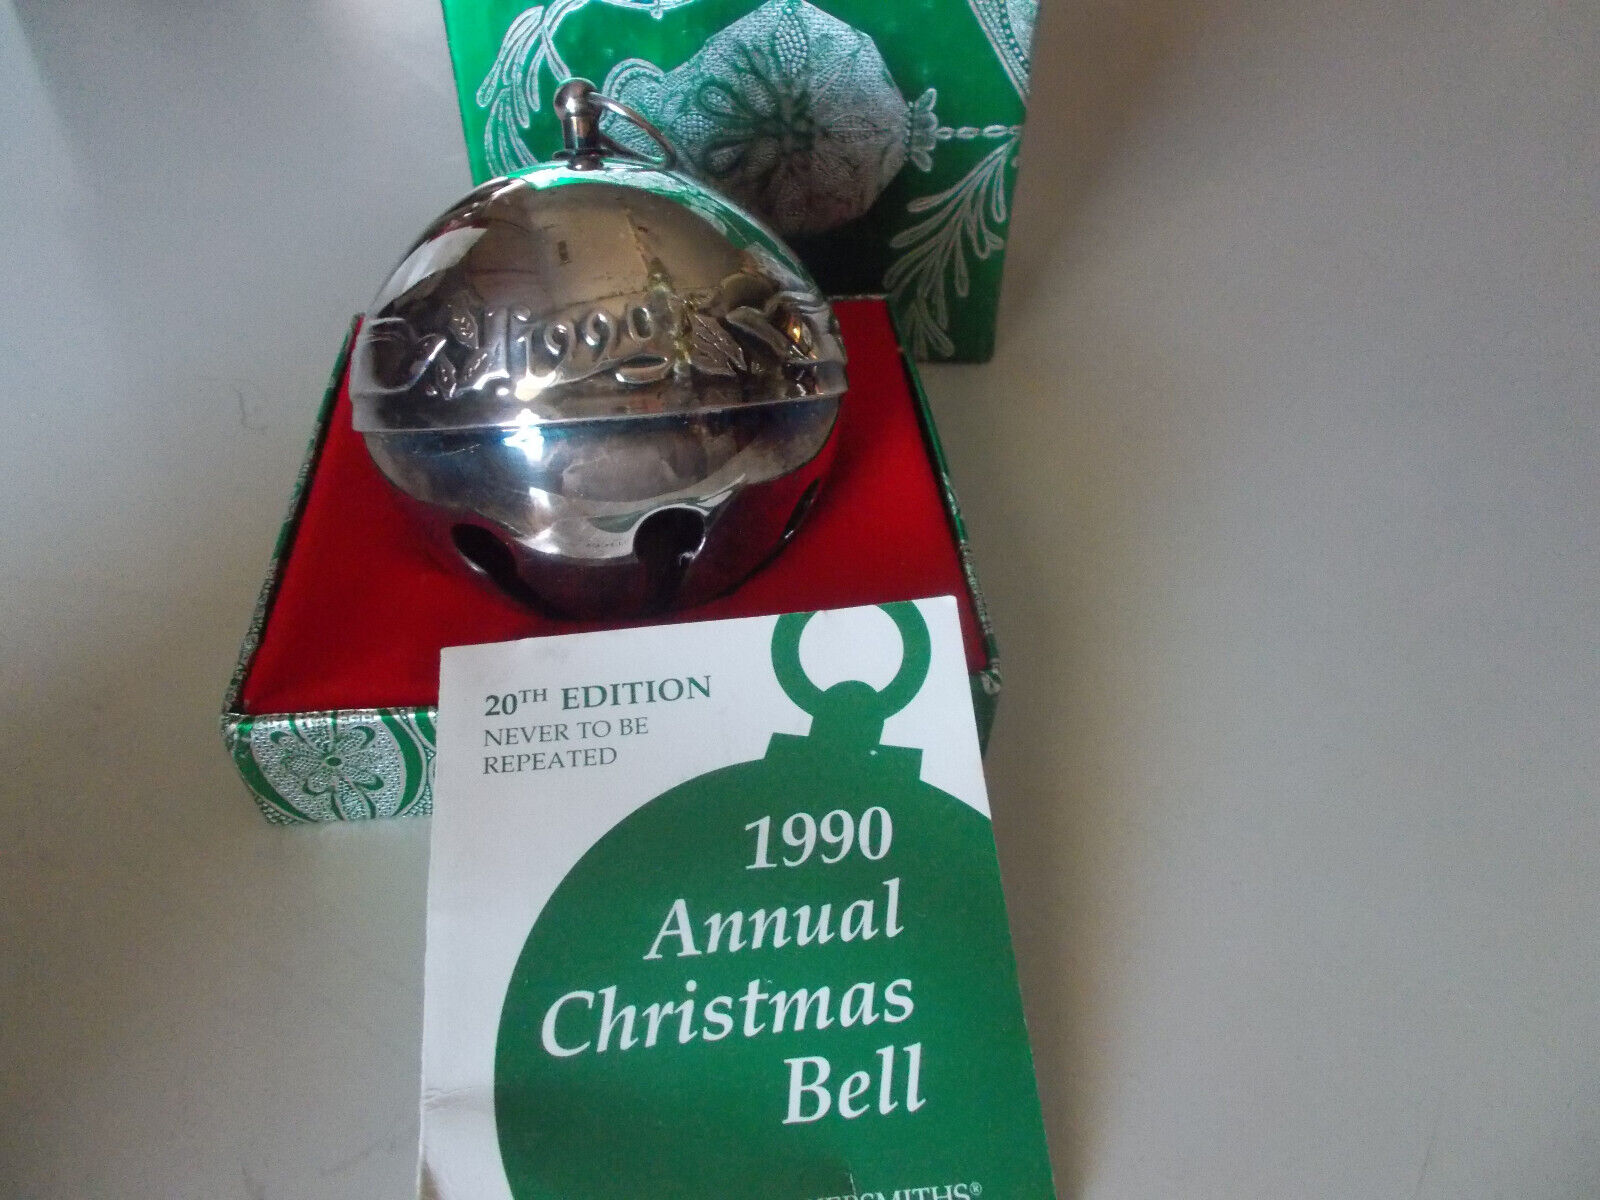 Wallace Silversmiths 20th Edition  1990 Annual Christmas Sleigh Bell